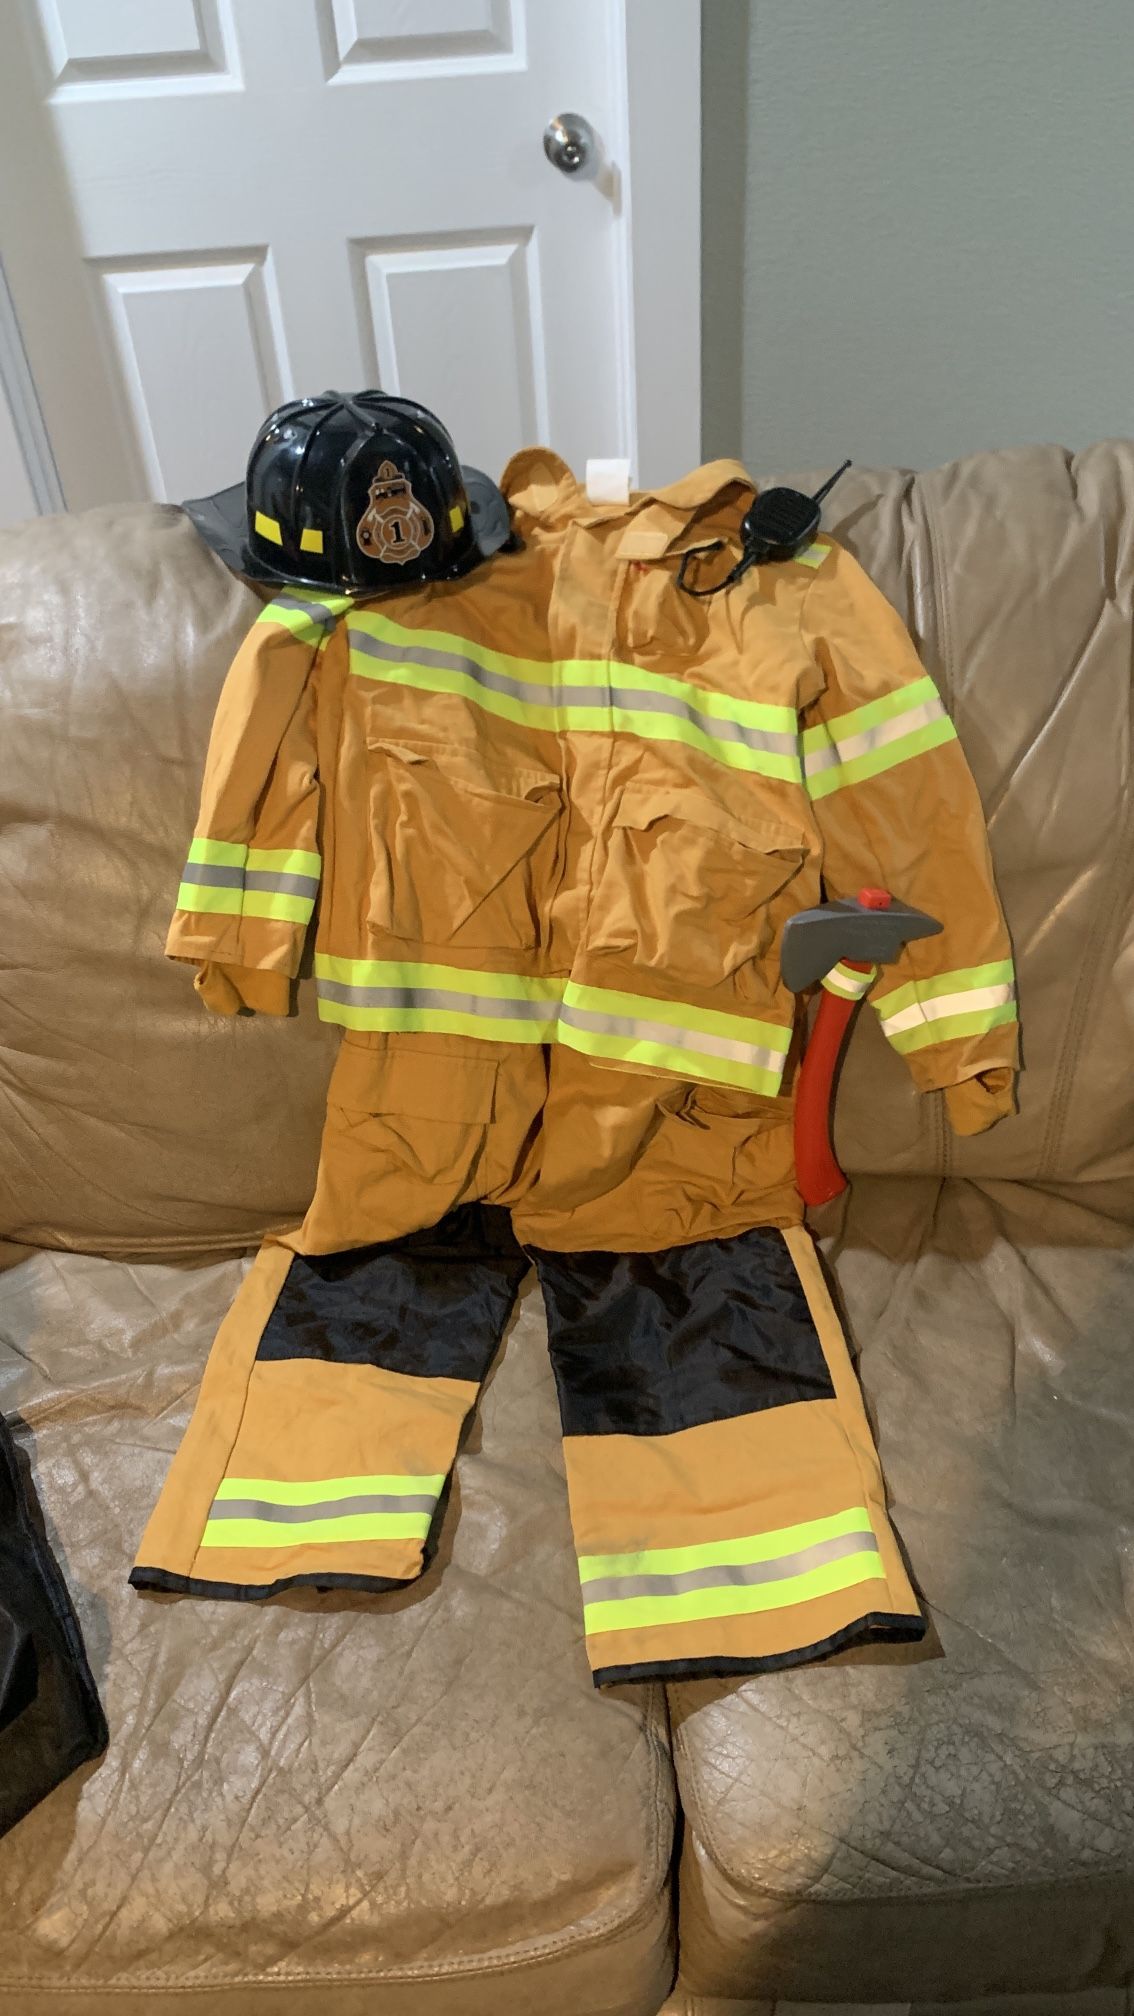 Pretend Play Child’s Firefighter Set And Big Rigs